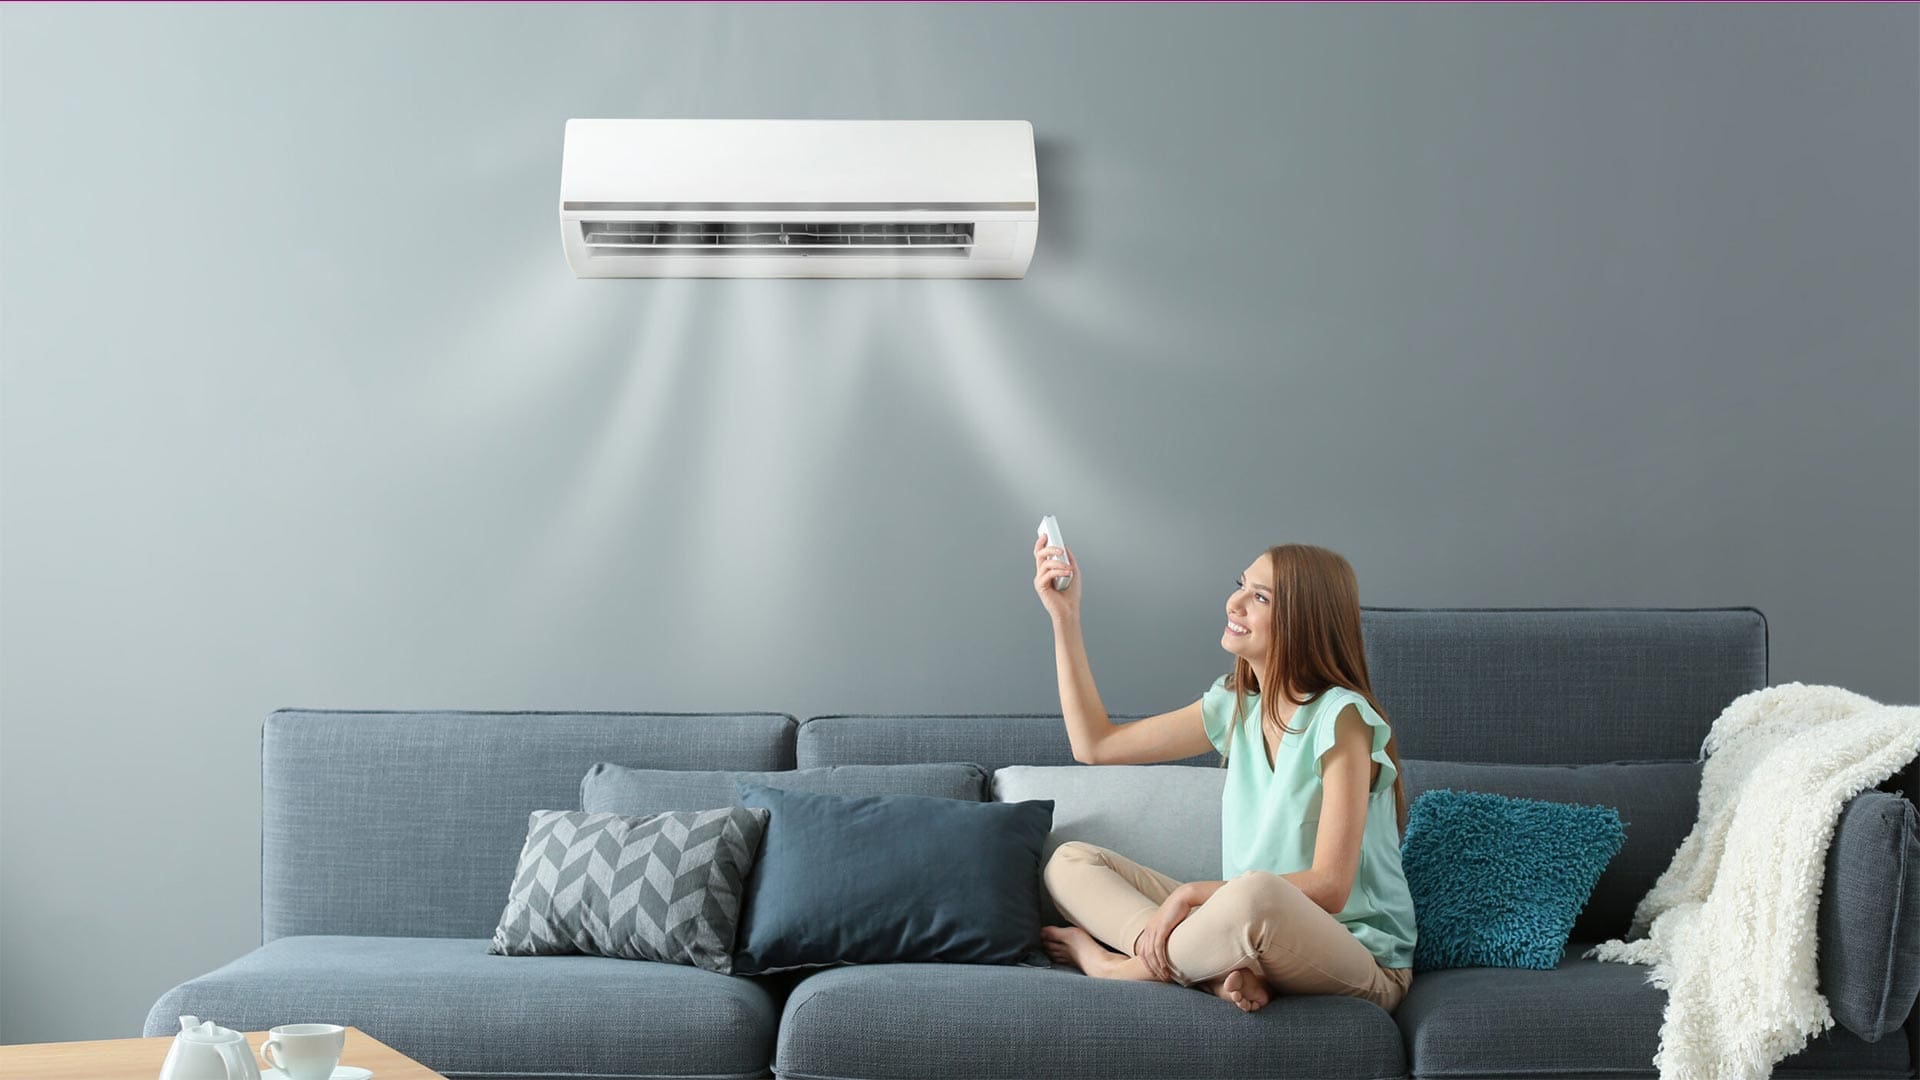 a woman sitting on a couch and turning on air conditioner.